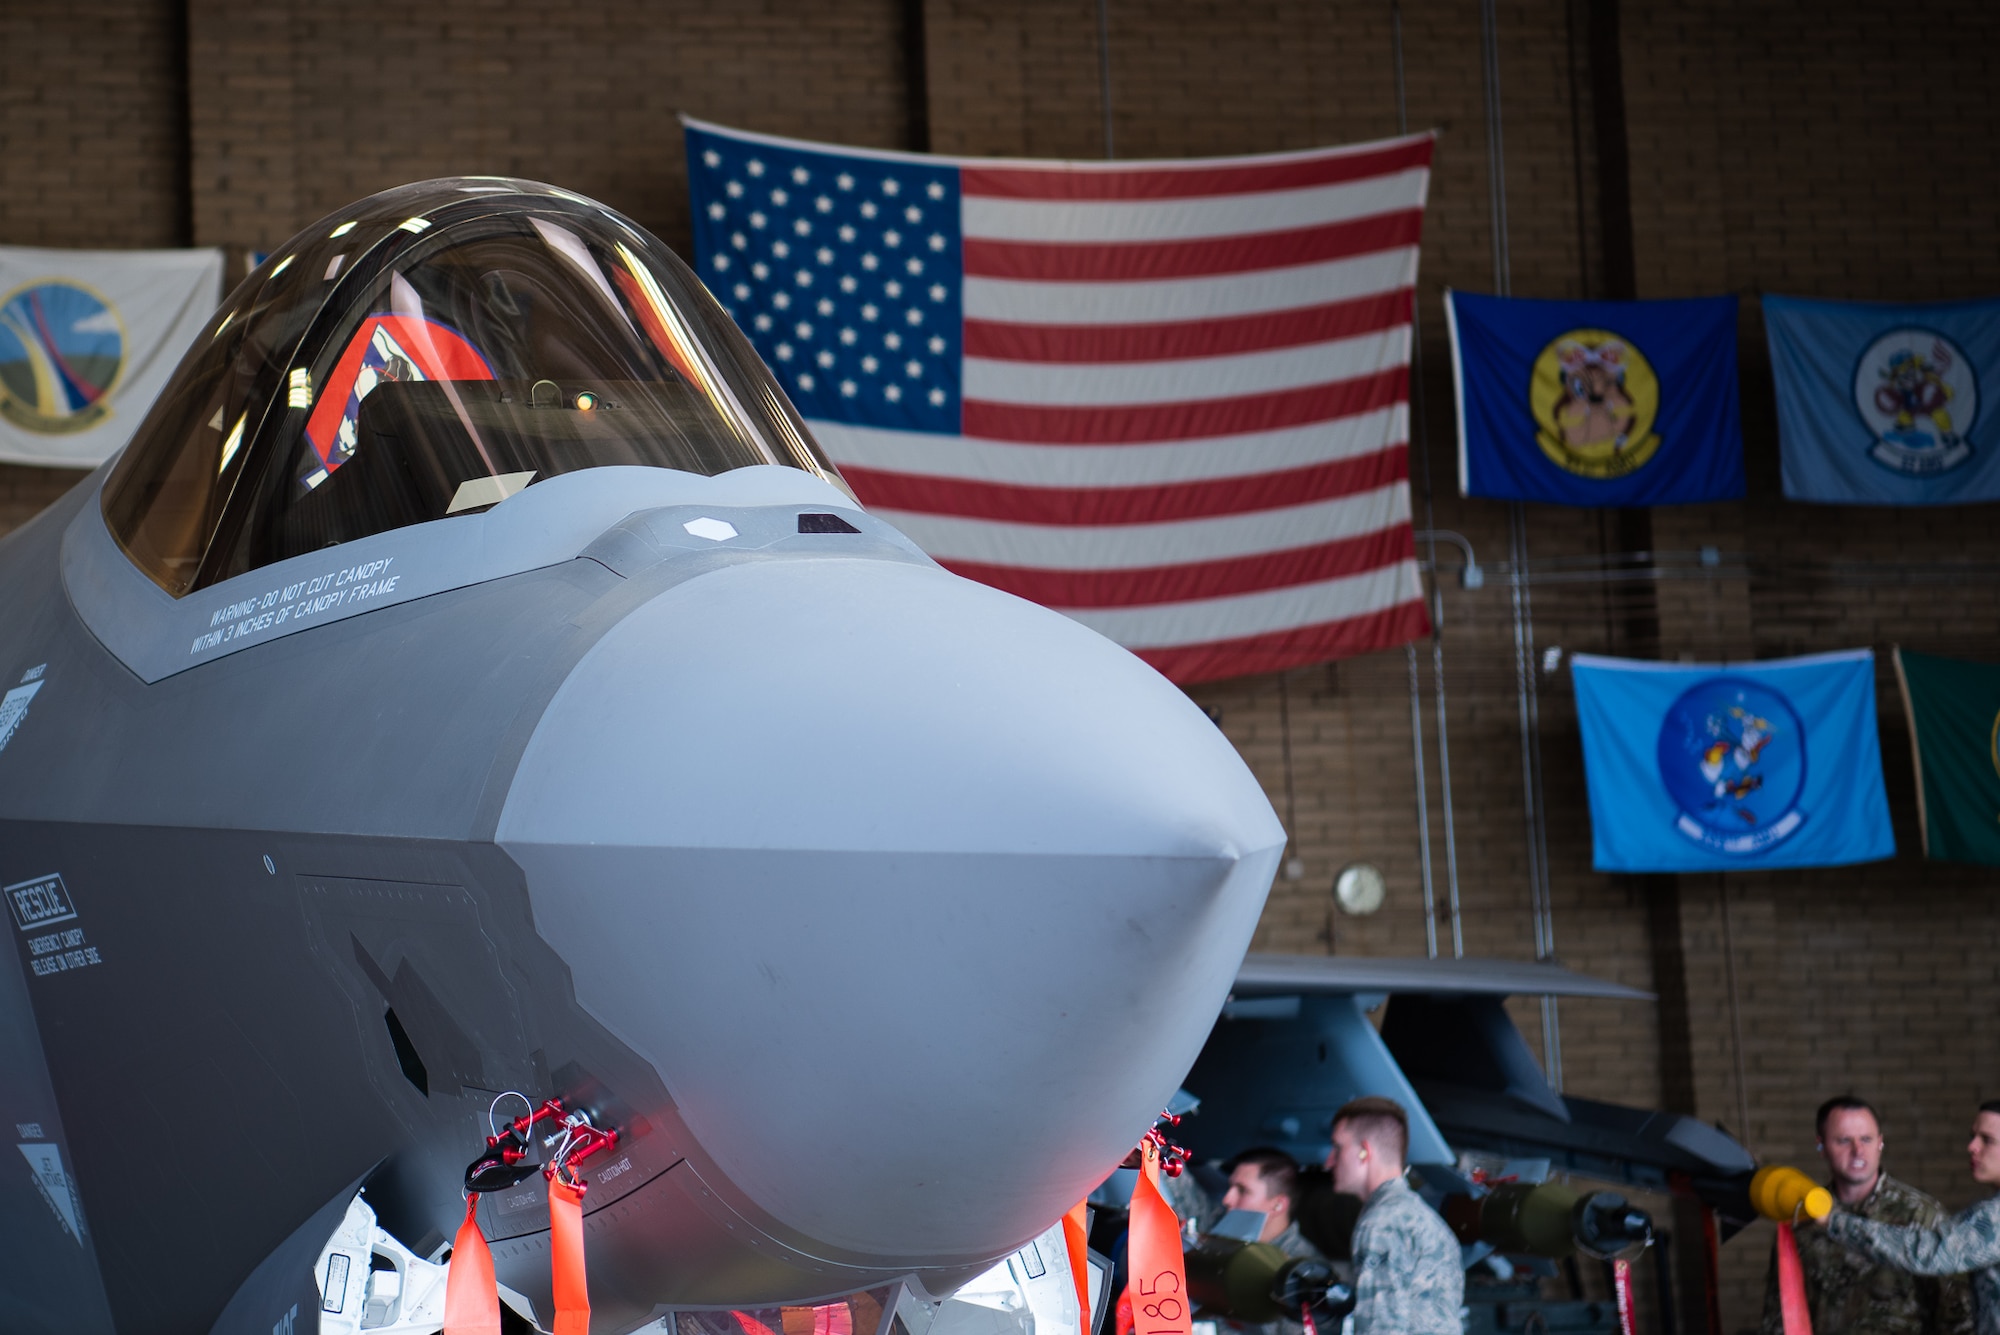 The F-35A Lightning II sits in a hangar loaded with dummy external munitions, Feb. 13, 2019 at Luke Air Force Base, Ariz. The F-35 brings together strategic international partnerships and alliances, where it will employ a variety of US and allied weapons. (U.S. Air Force photo by Airman 1st Class Aspen Reid)